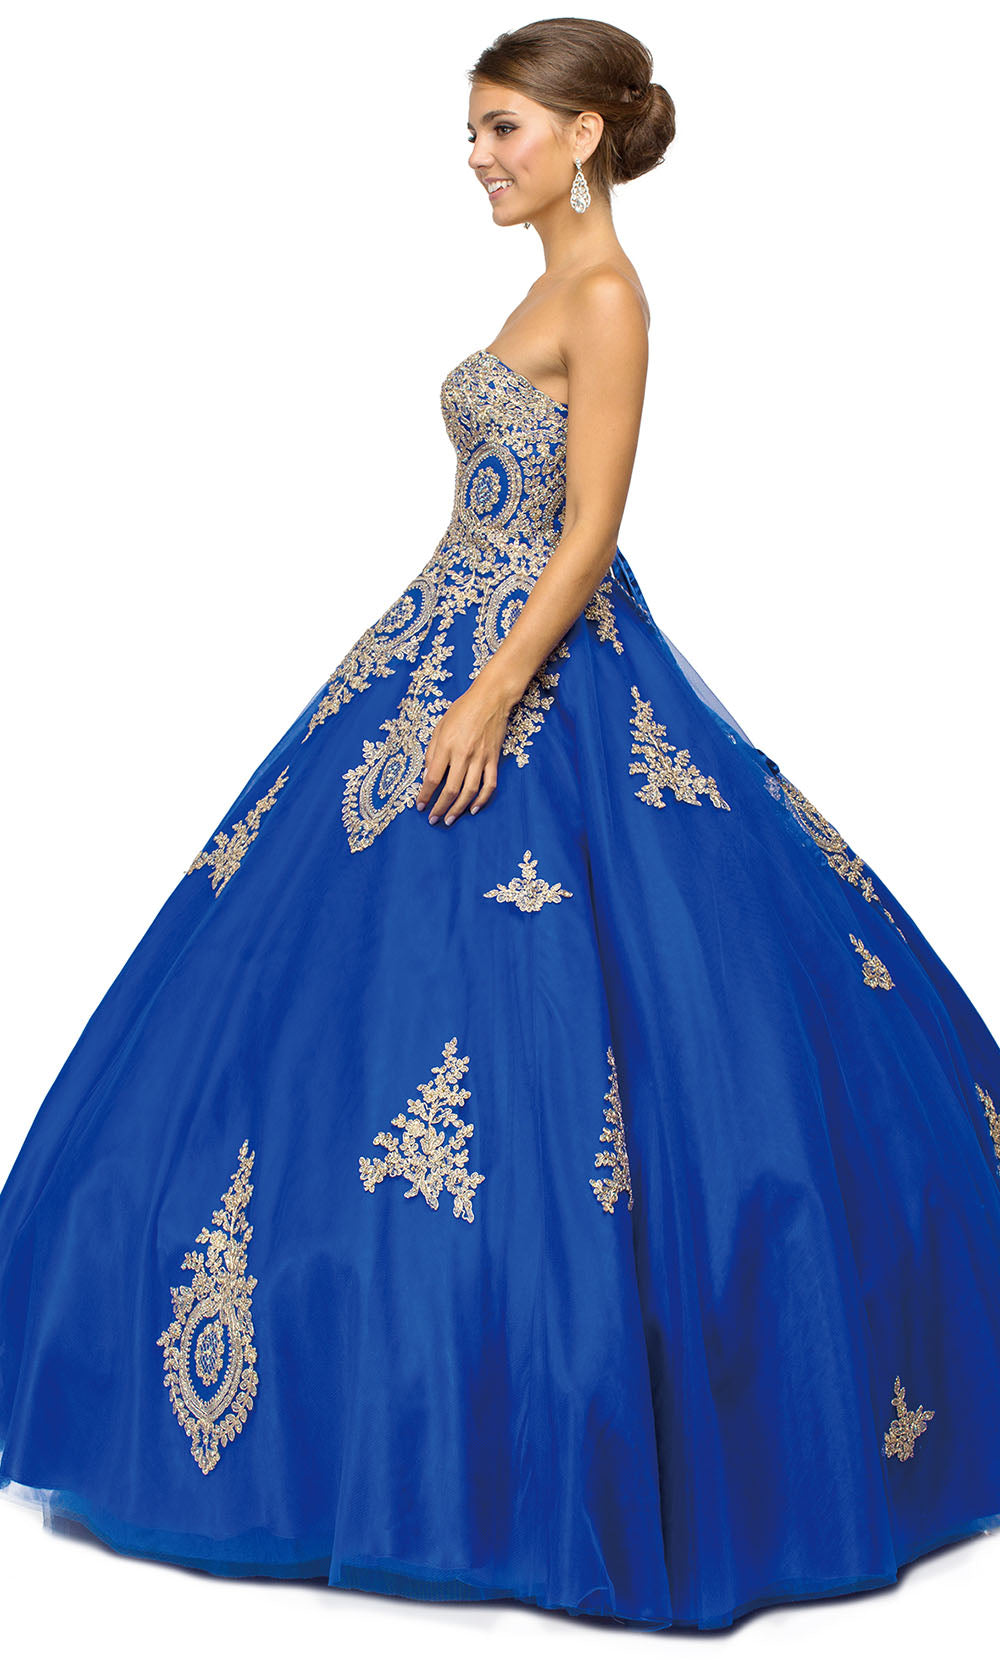 Dancing Queen - 1105 Strapless Metallic Lace Appliques Ballgown In Blue